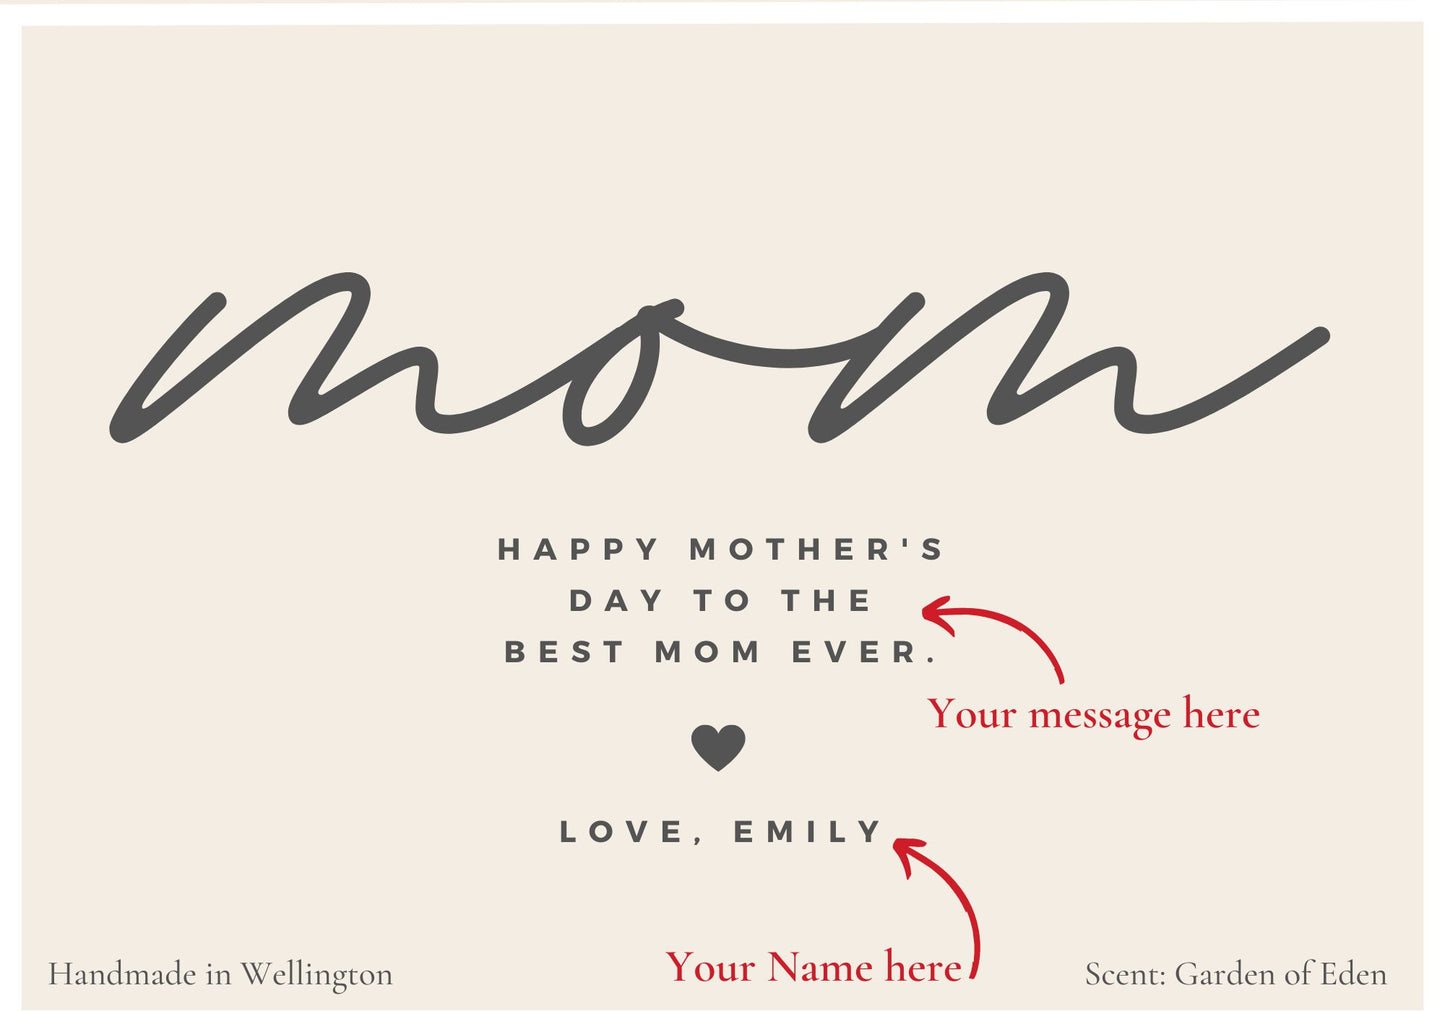 Personalised Minimalist handwriting "MOM" Candle - Personalized Gifts